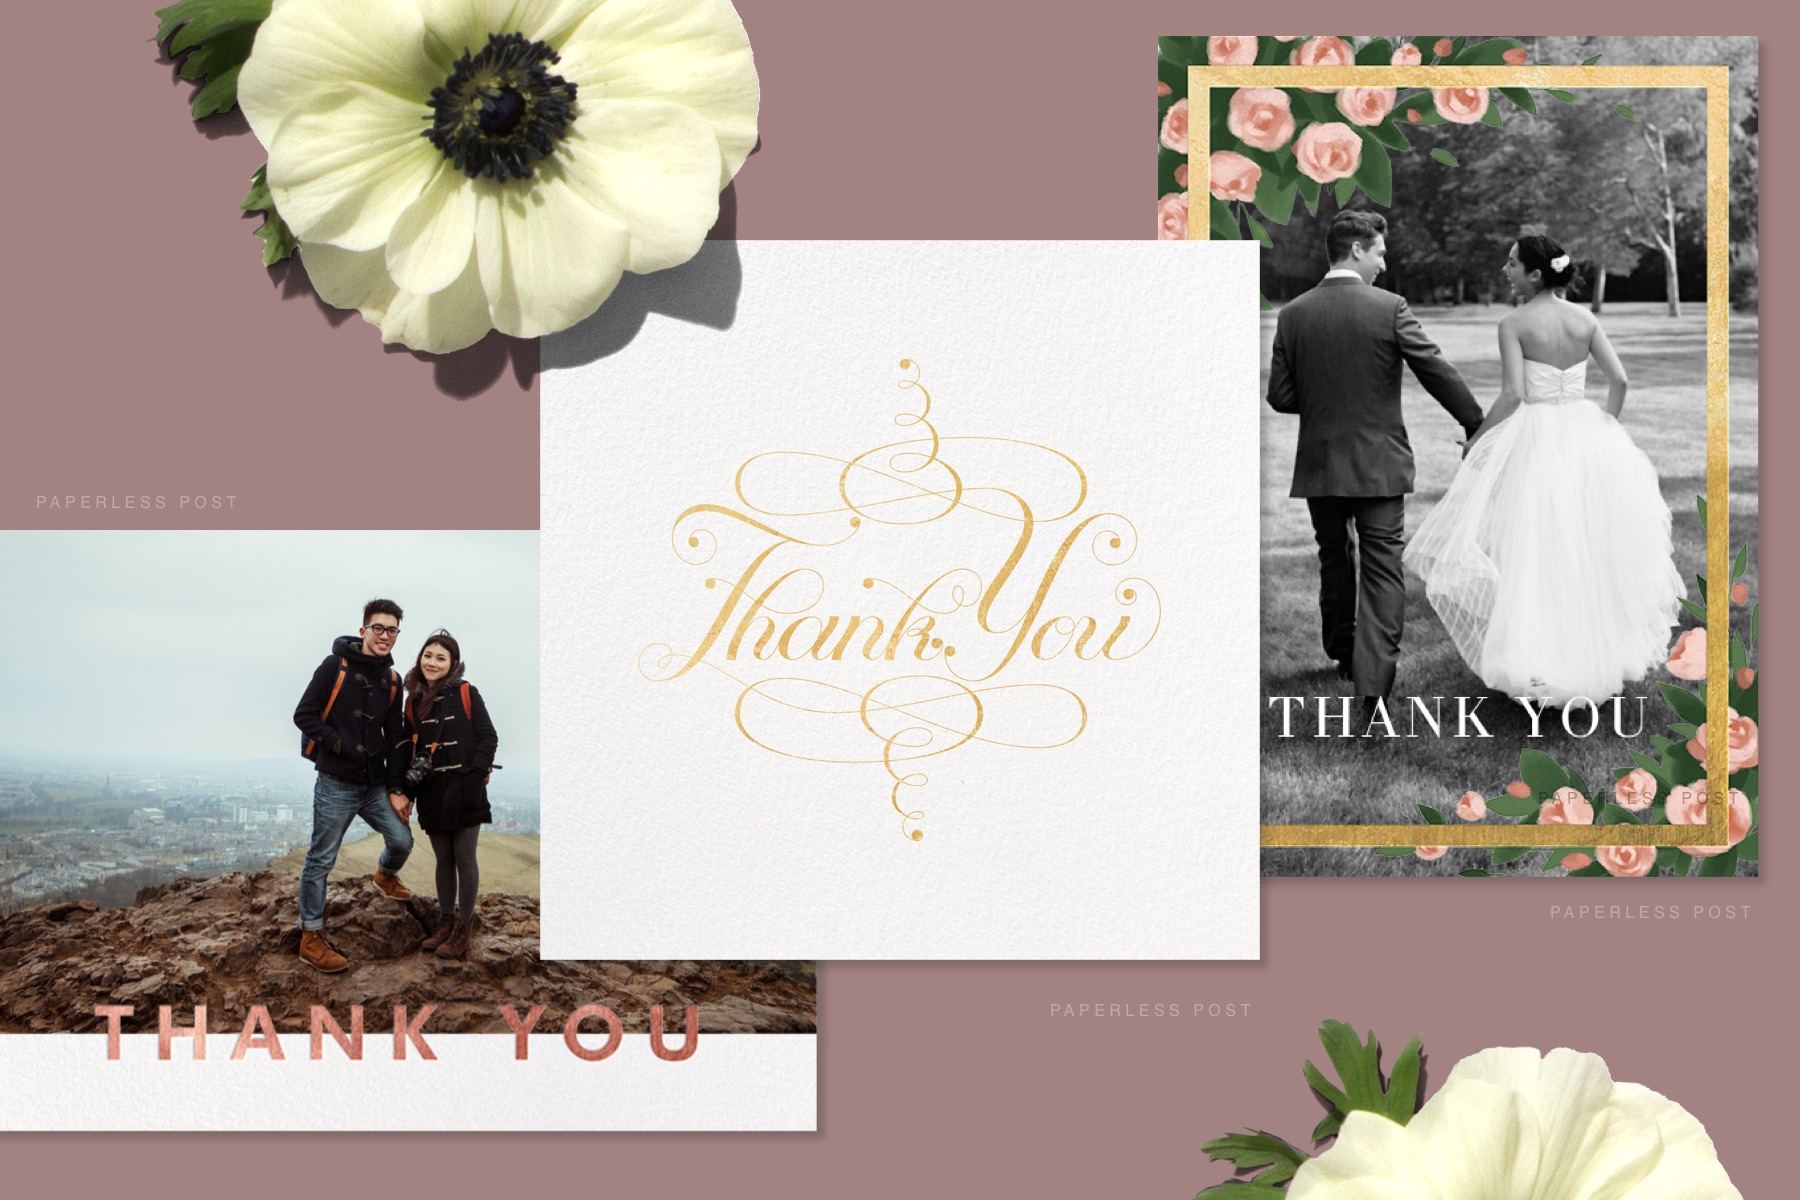 Collage of three Paperless Post thank you card designs along with two flowers on a rose background.